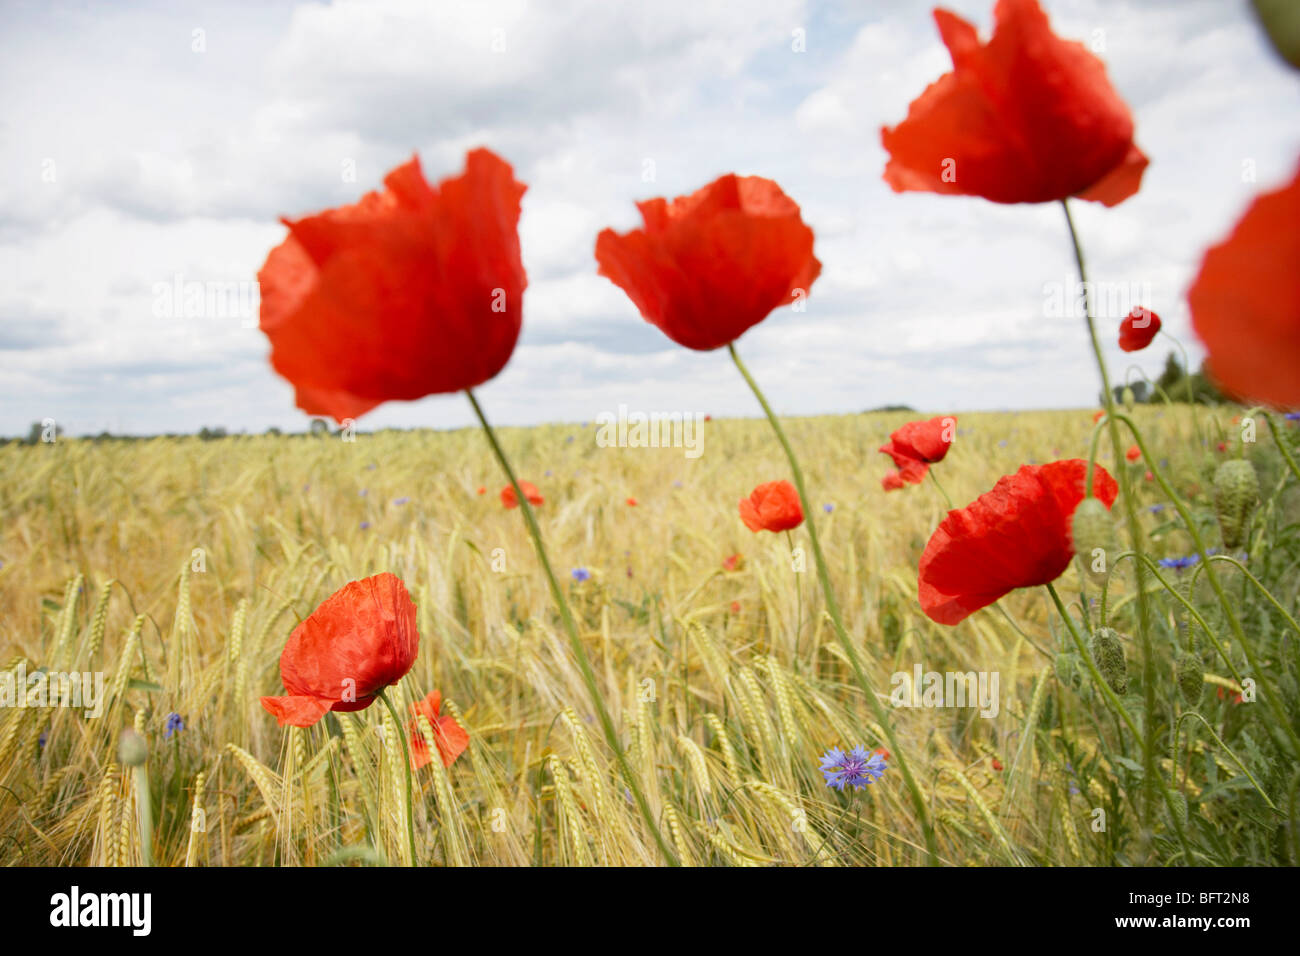 Poppies in Wheat Field Stock Photo